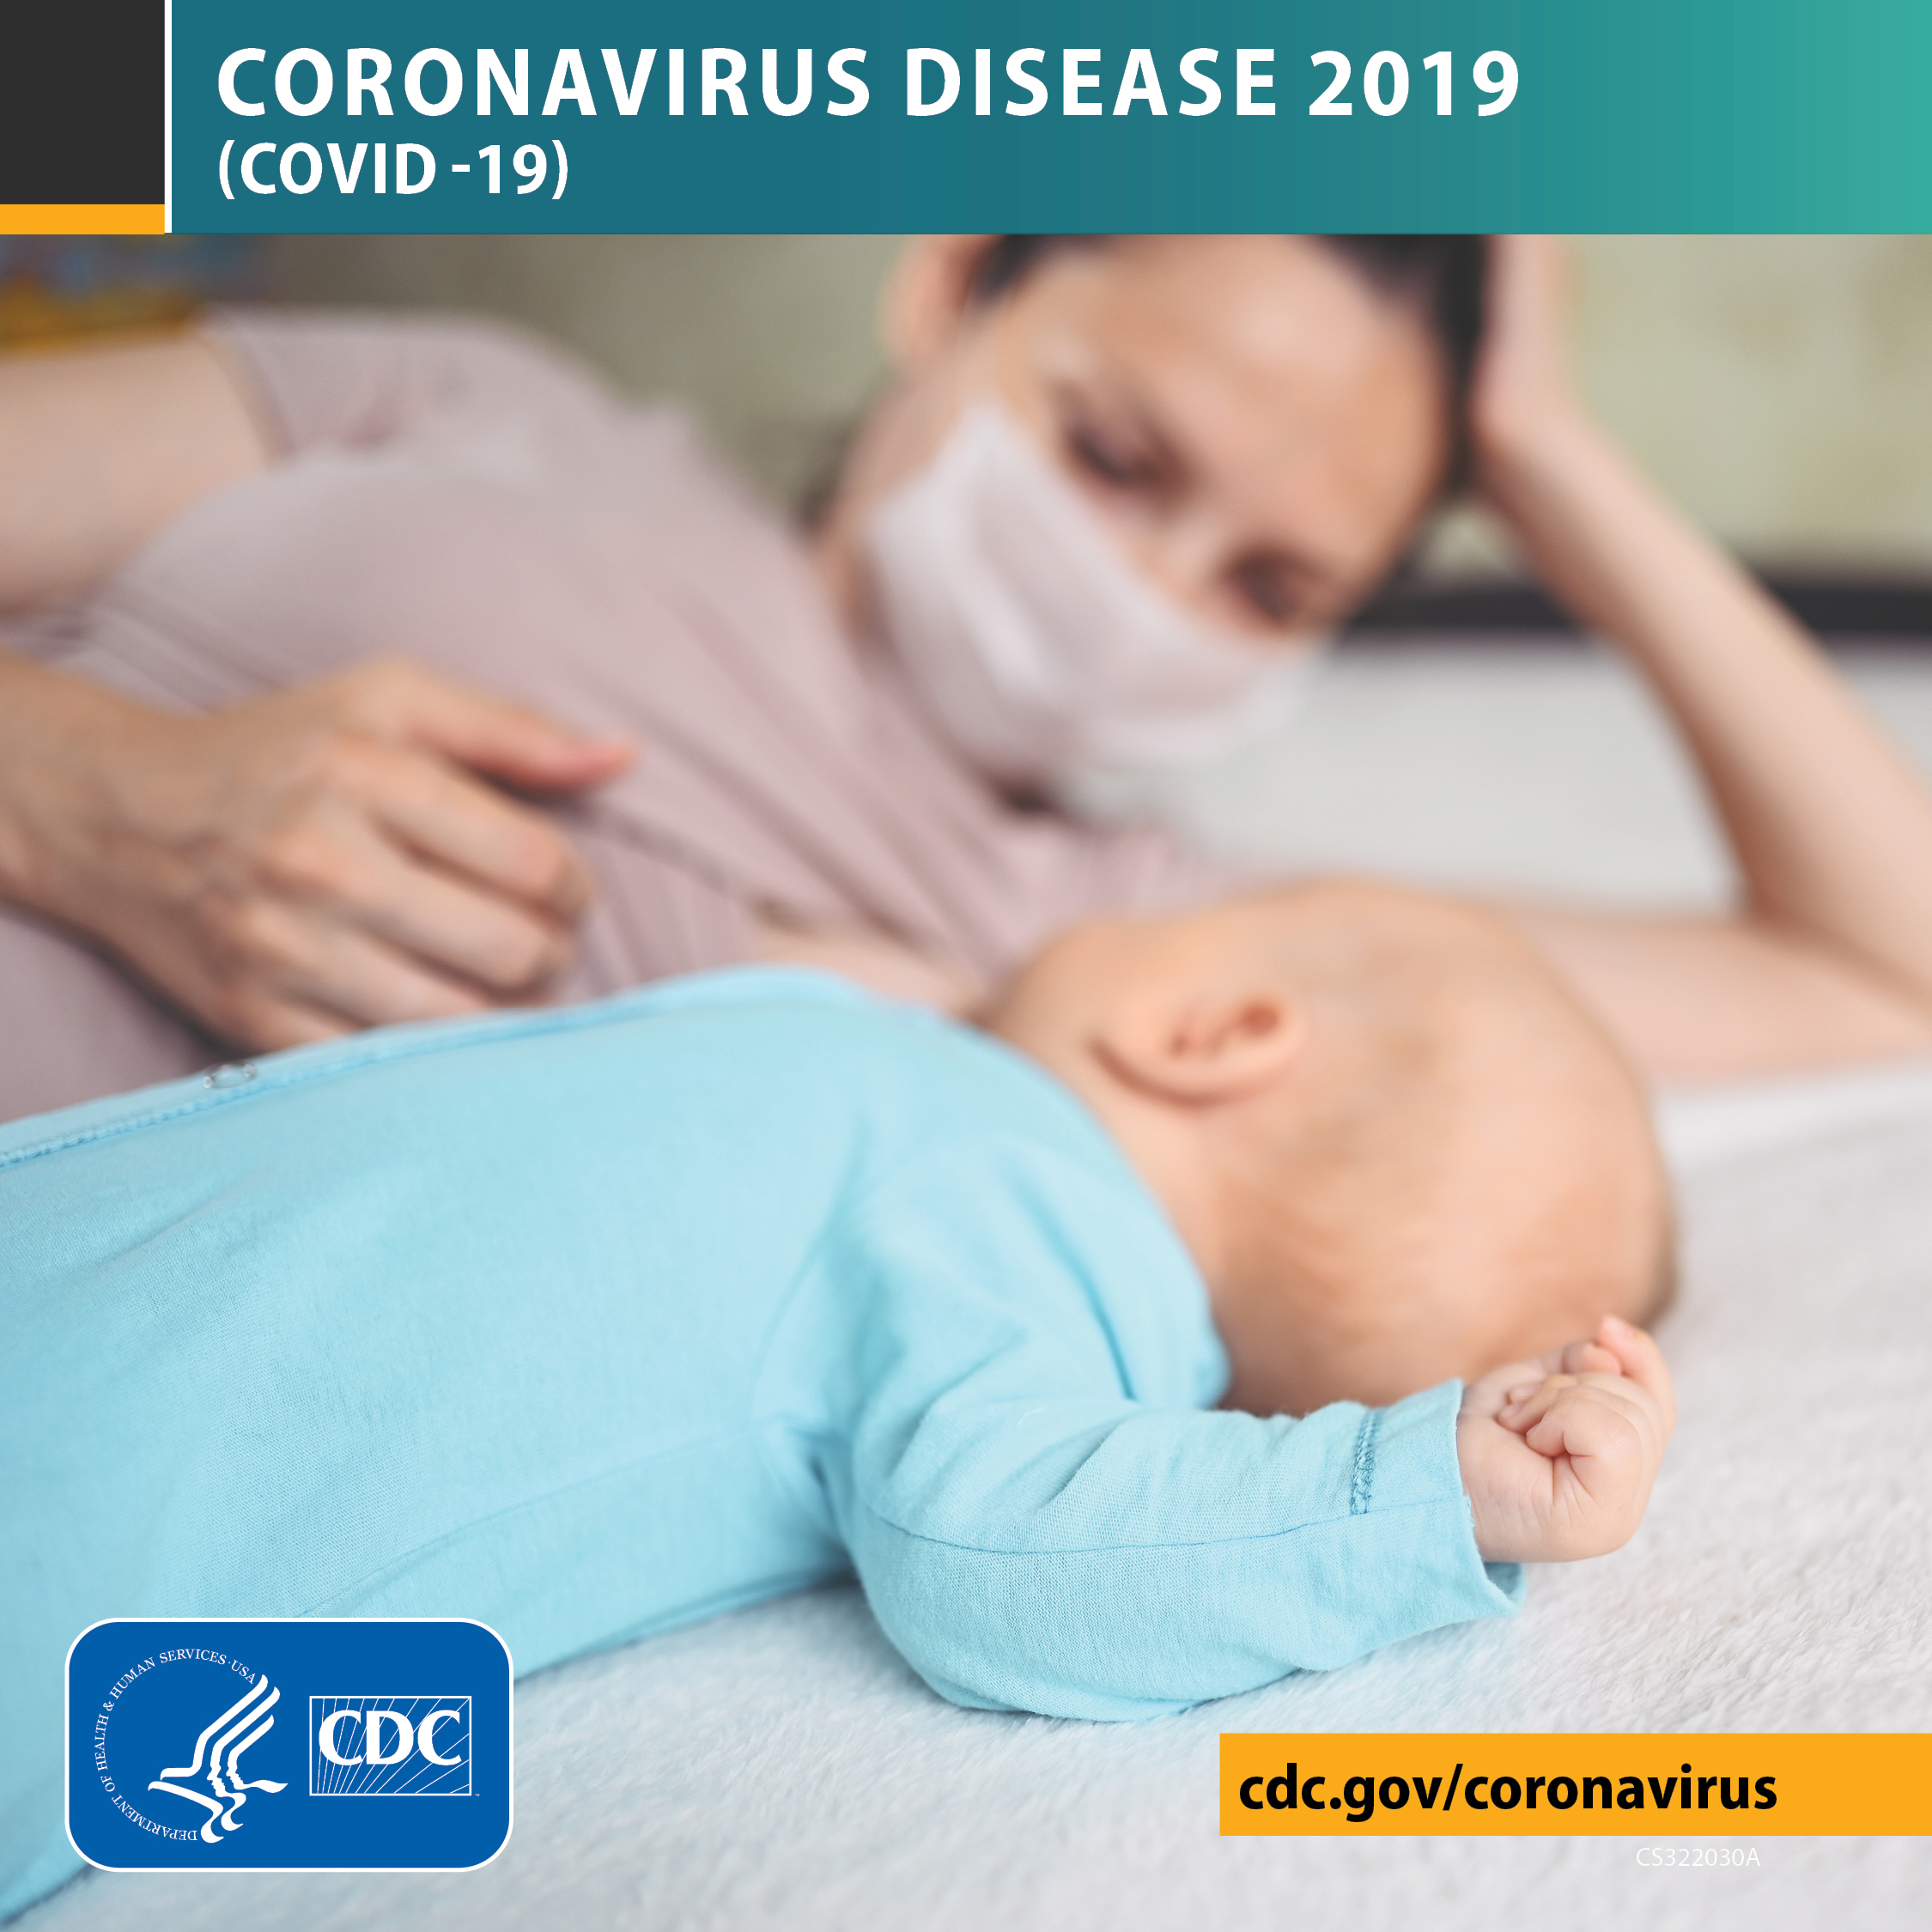 Protect yourself and your newborn baby from COVID-19